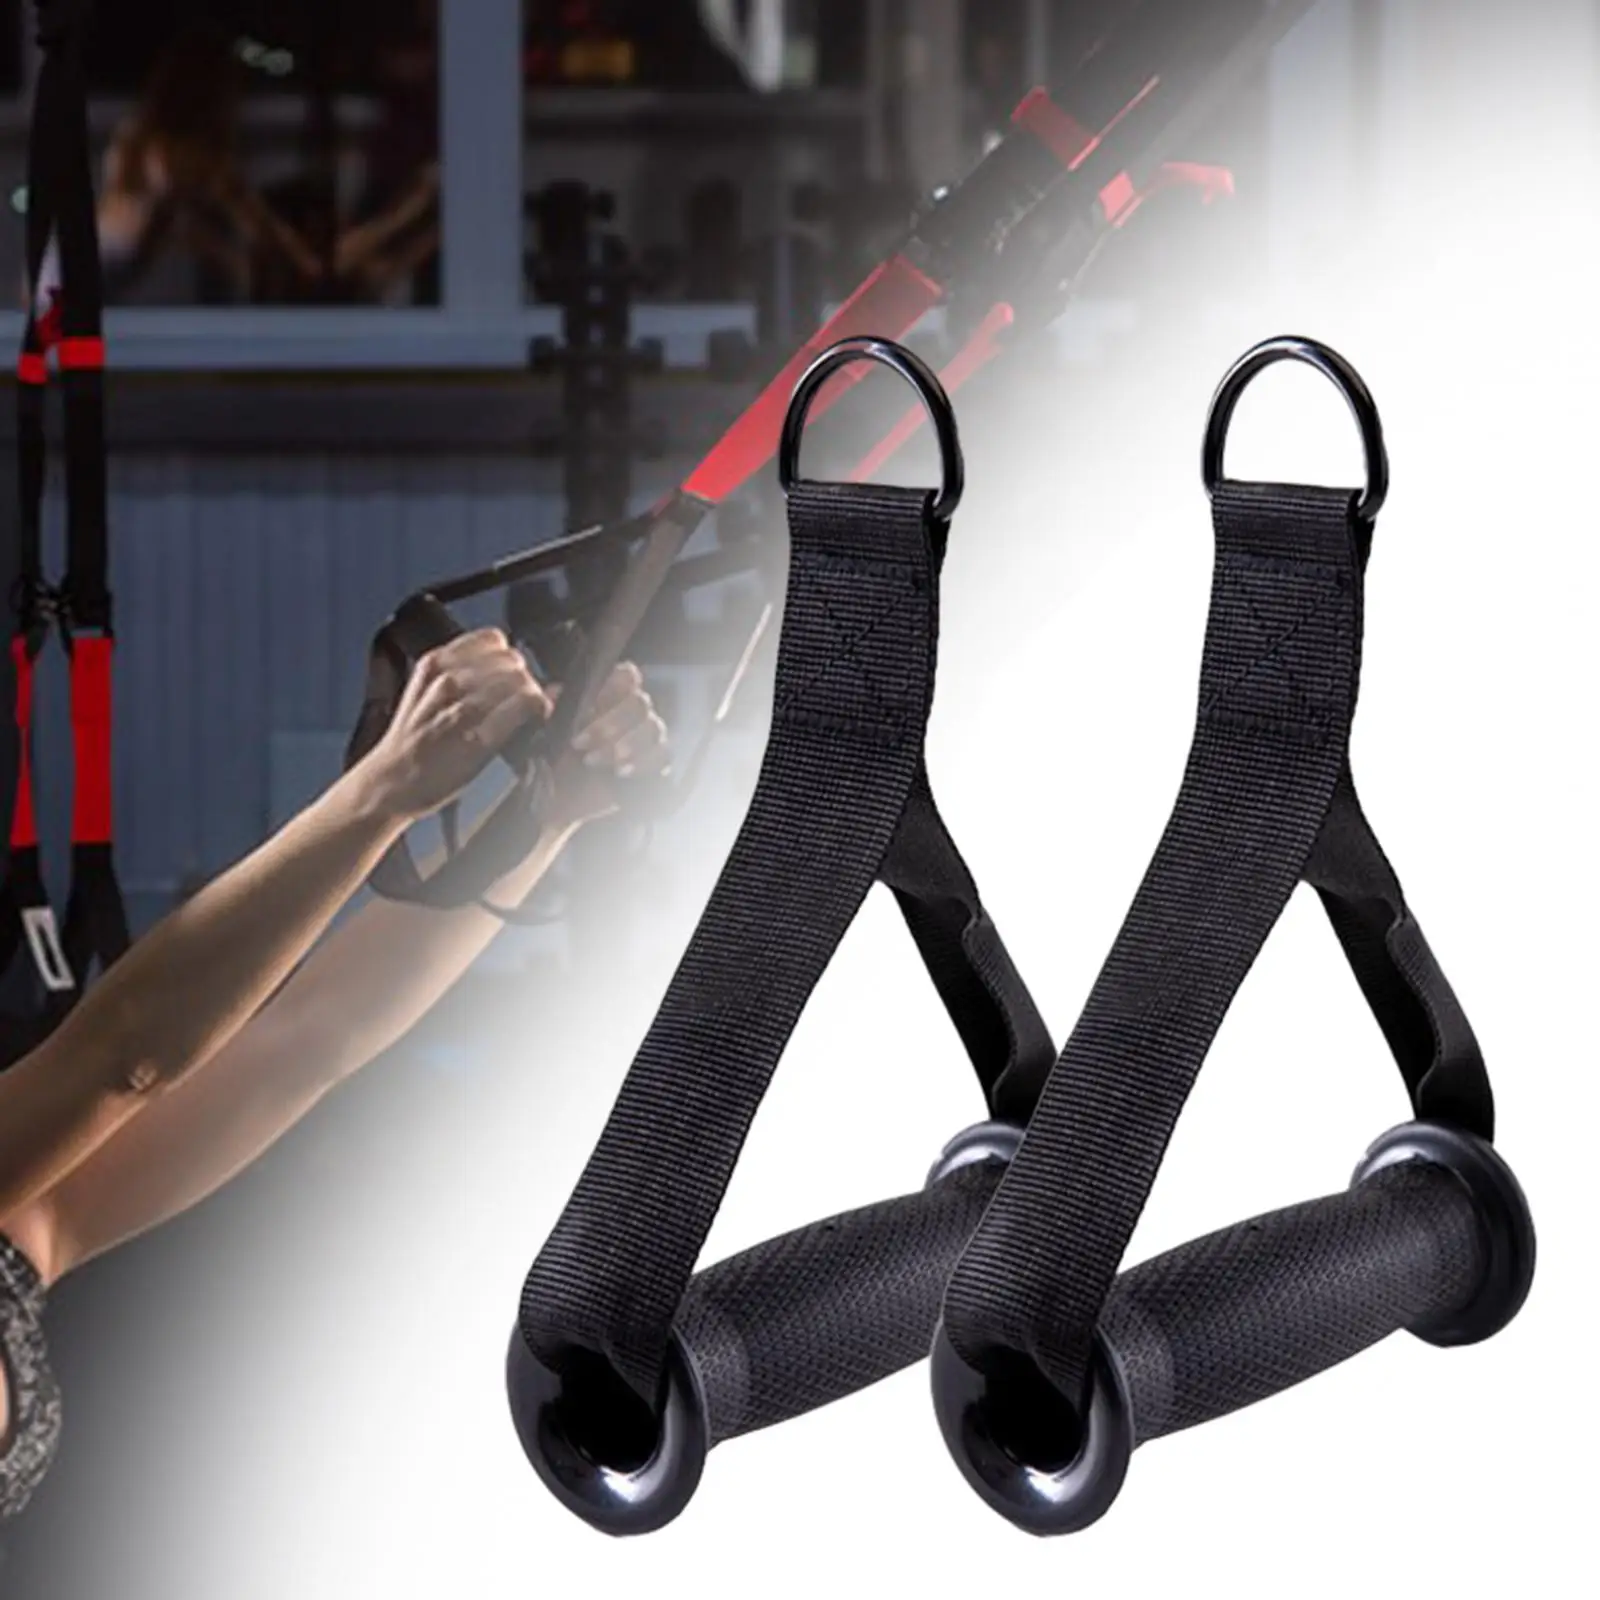 Resistance Band Handles Grips Black Exercise Handles for Strength Training Pilates Home Gym Equipment Pulley System Accessories